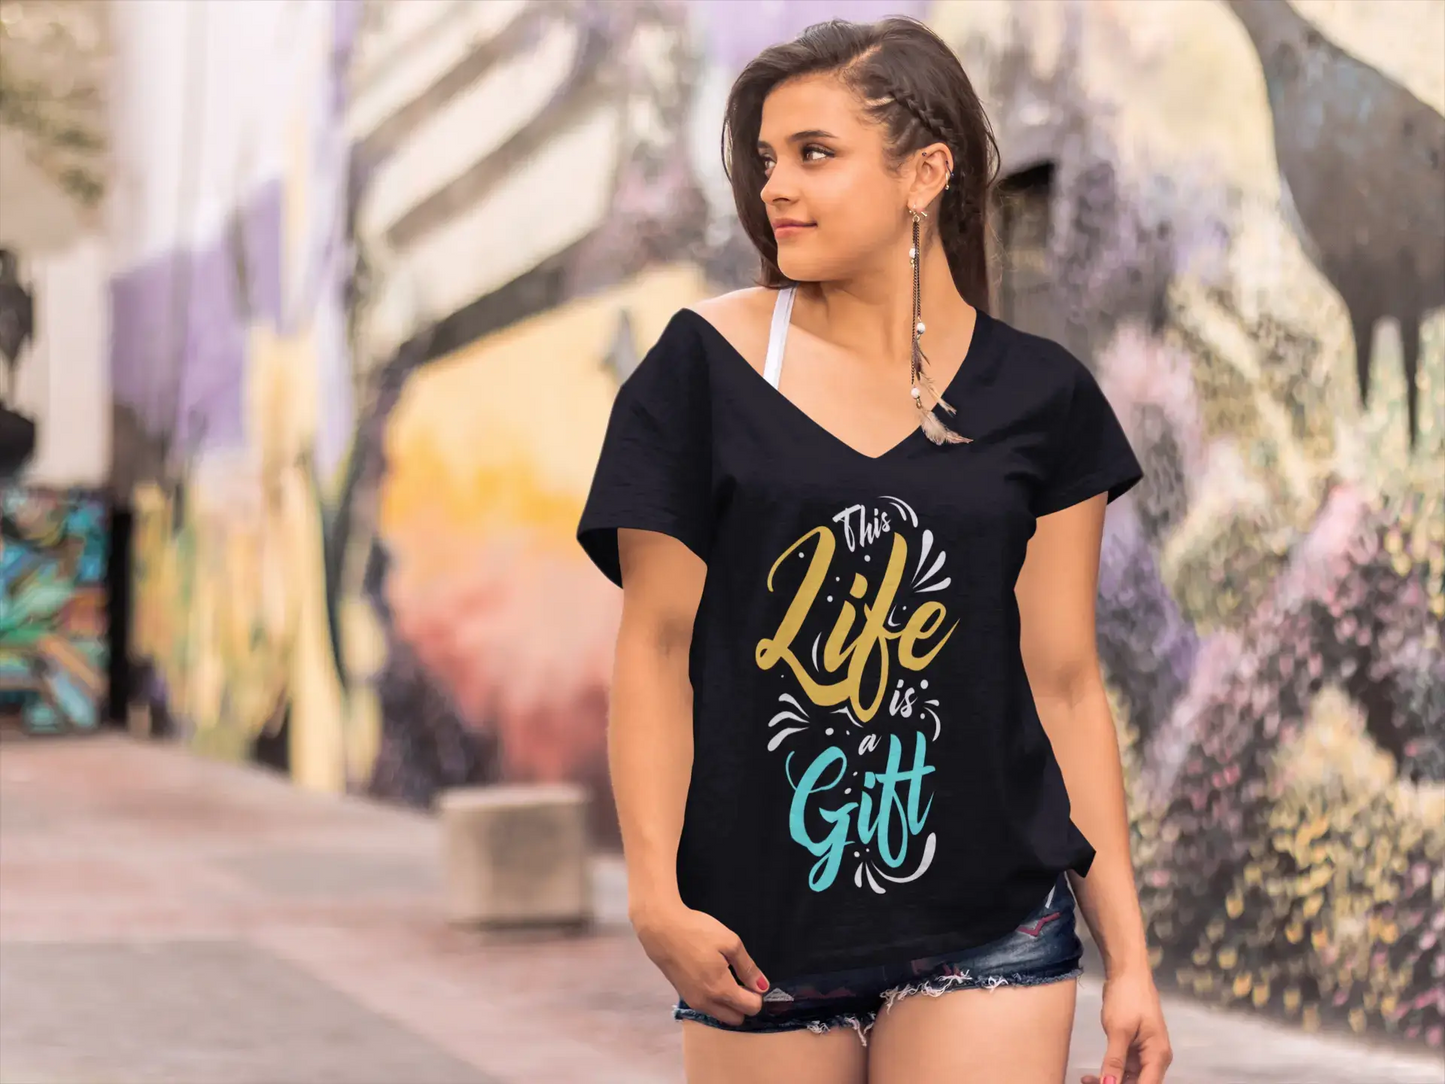 ULTRABASIC Women's Graphic T-Shirt This Life is a Gift - Motivational Quote Shirt